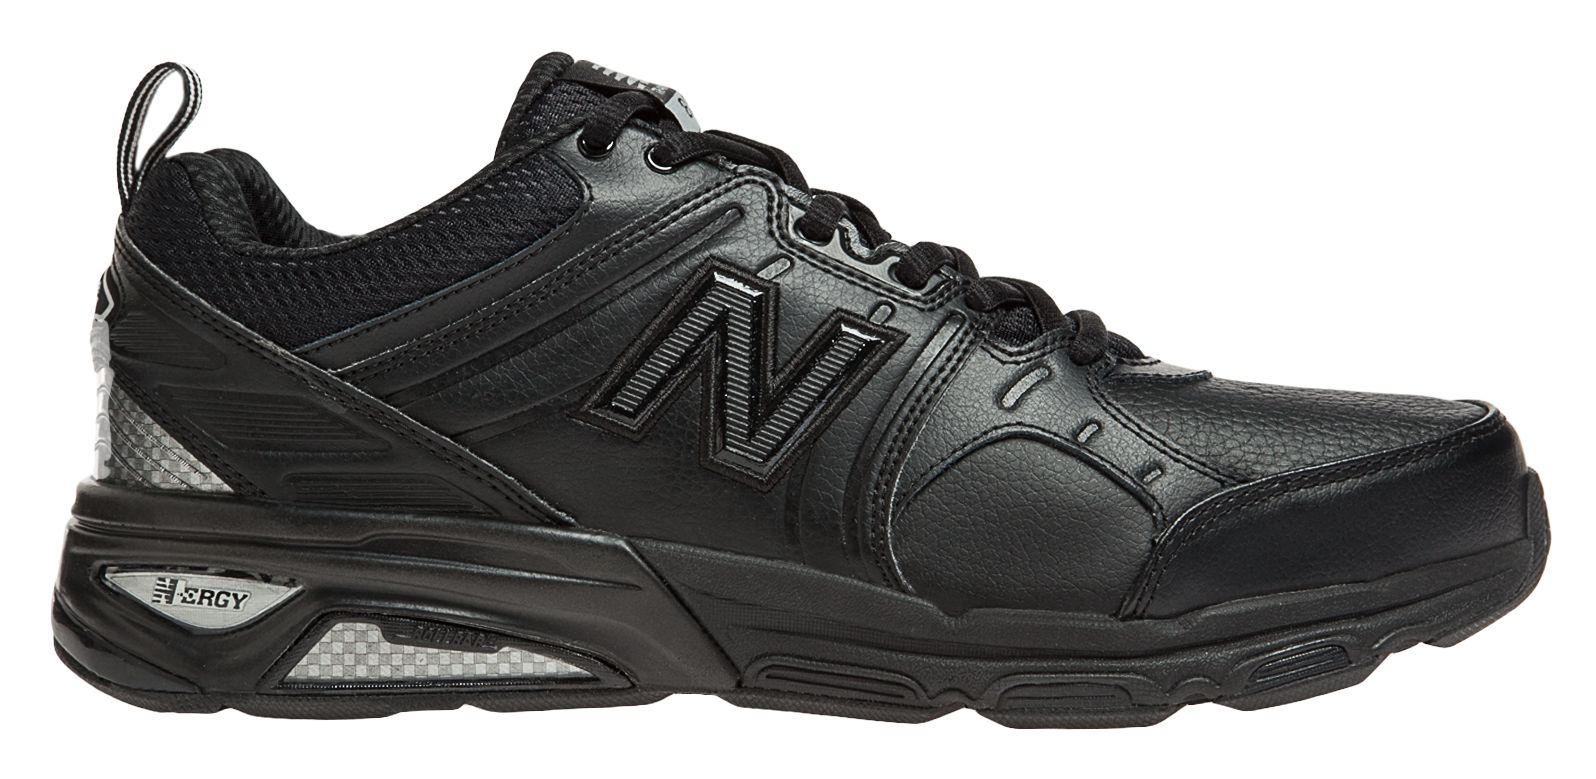 Men’s Running Shoes & More on Sale - New Balance